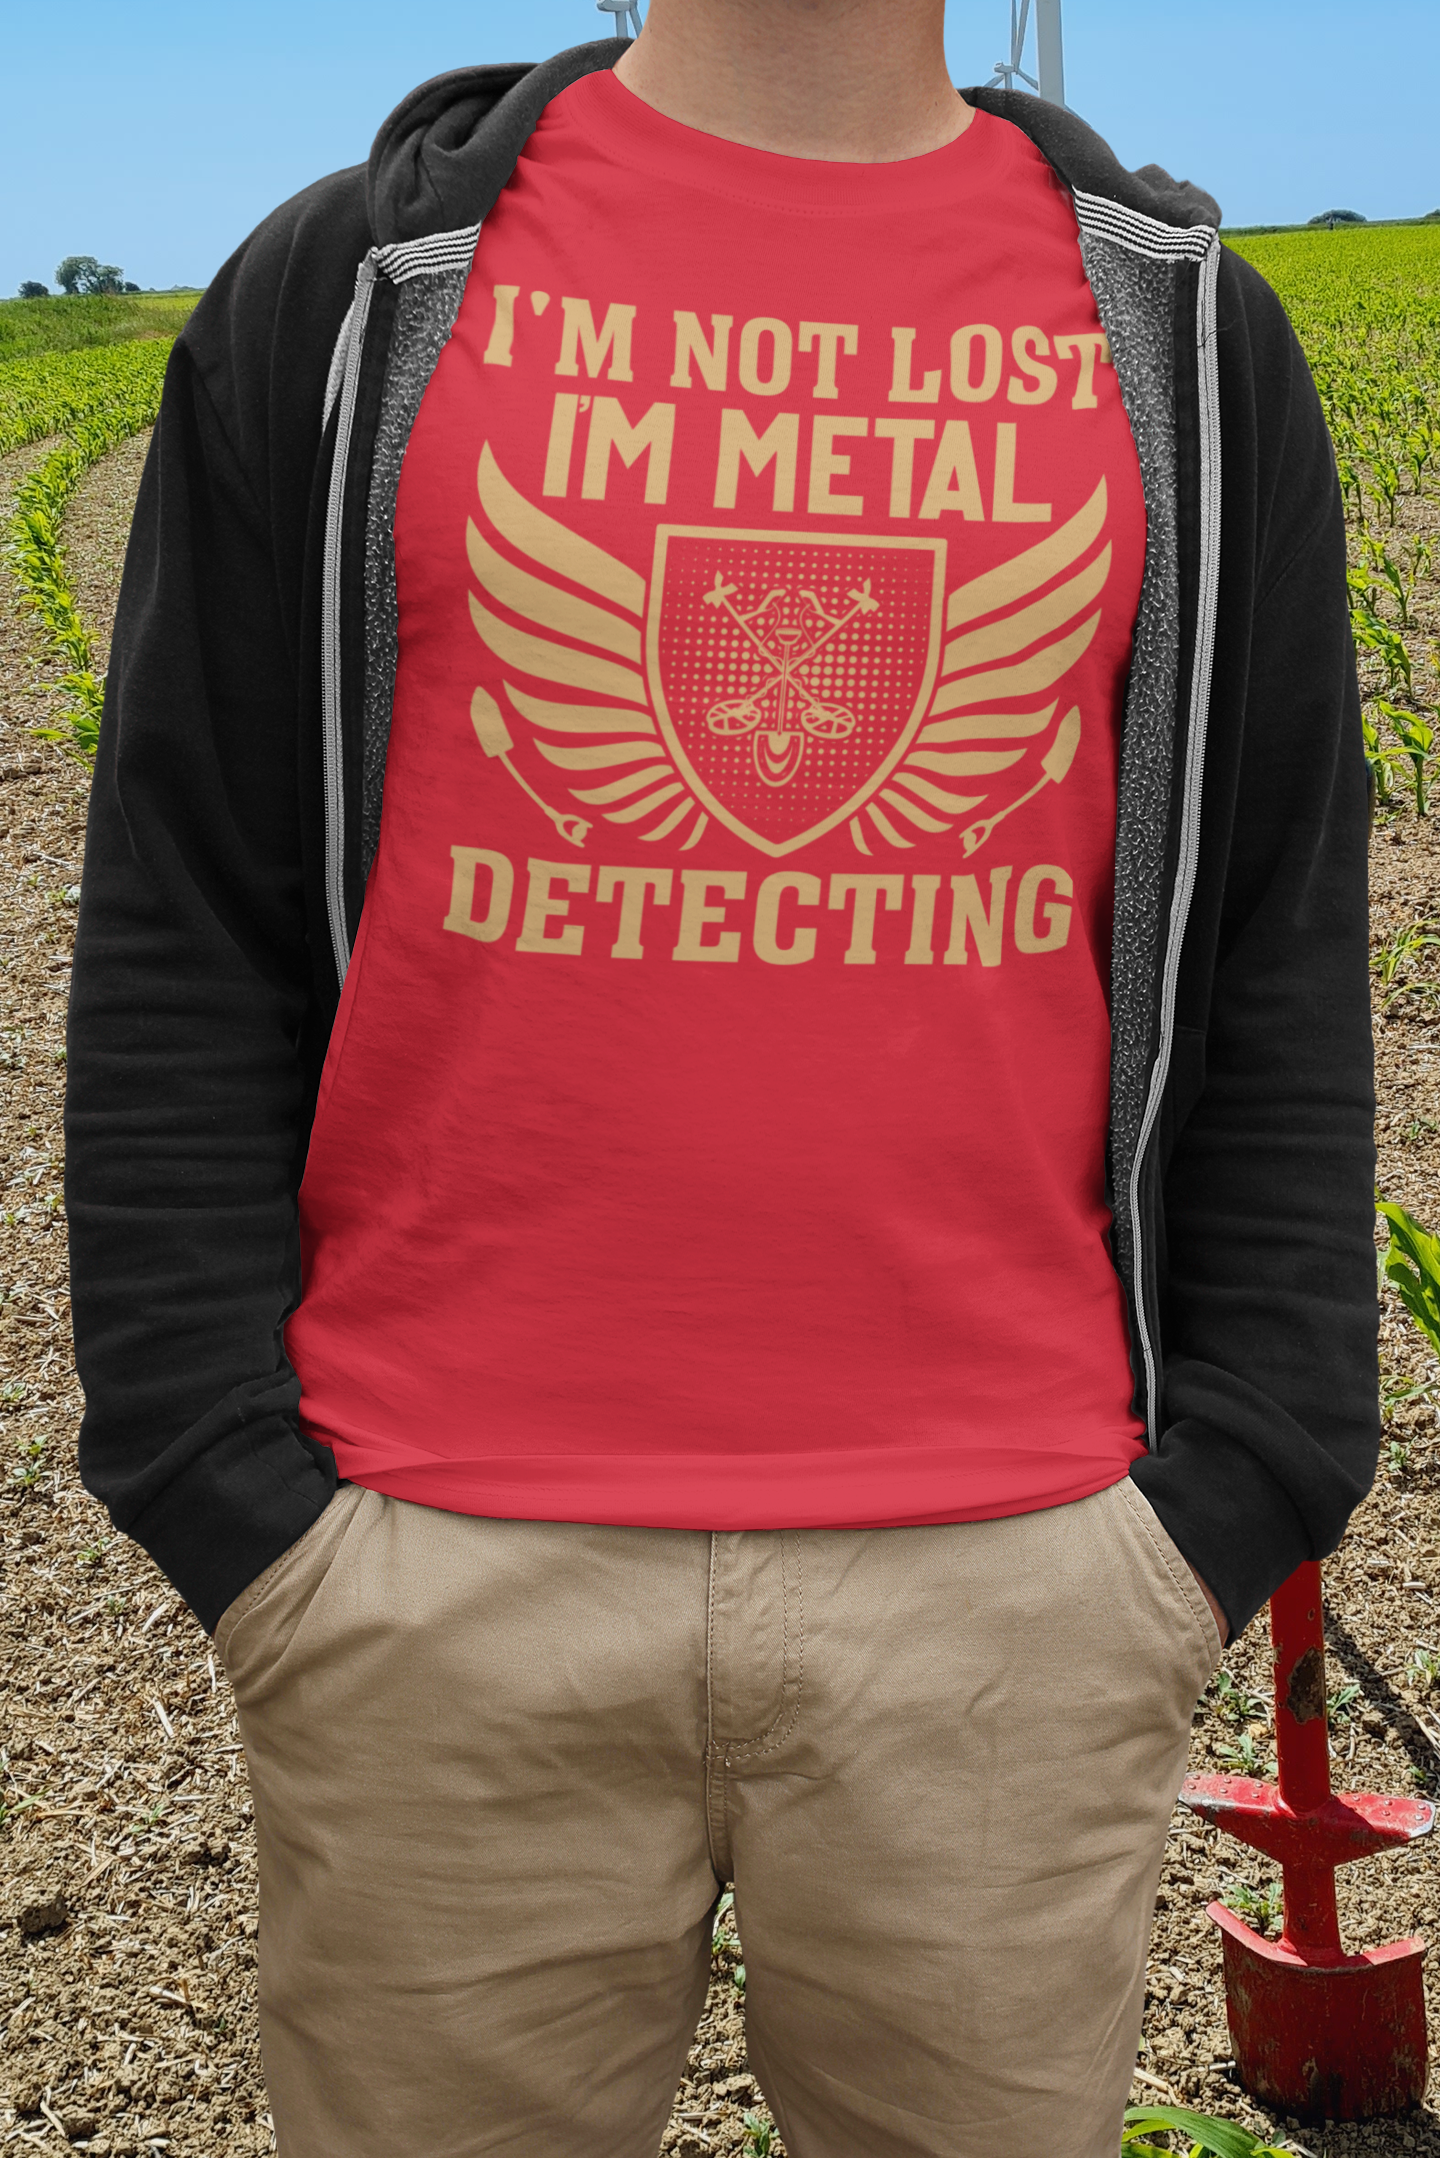 I'm Not Lost I'm Metal Detecting